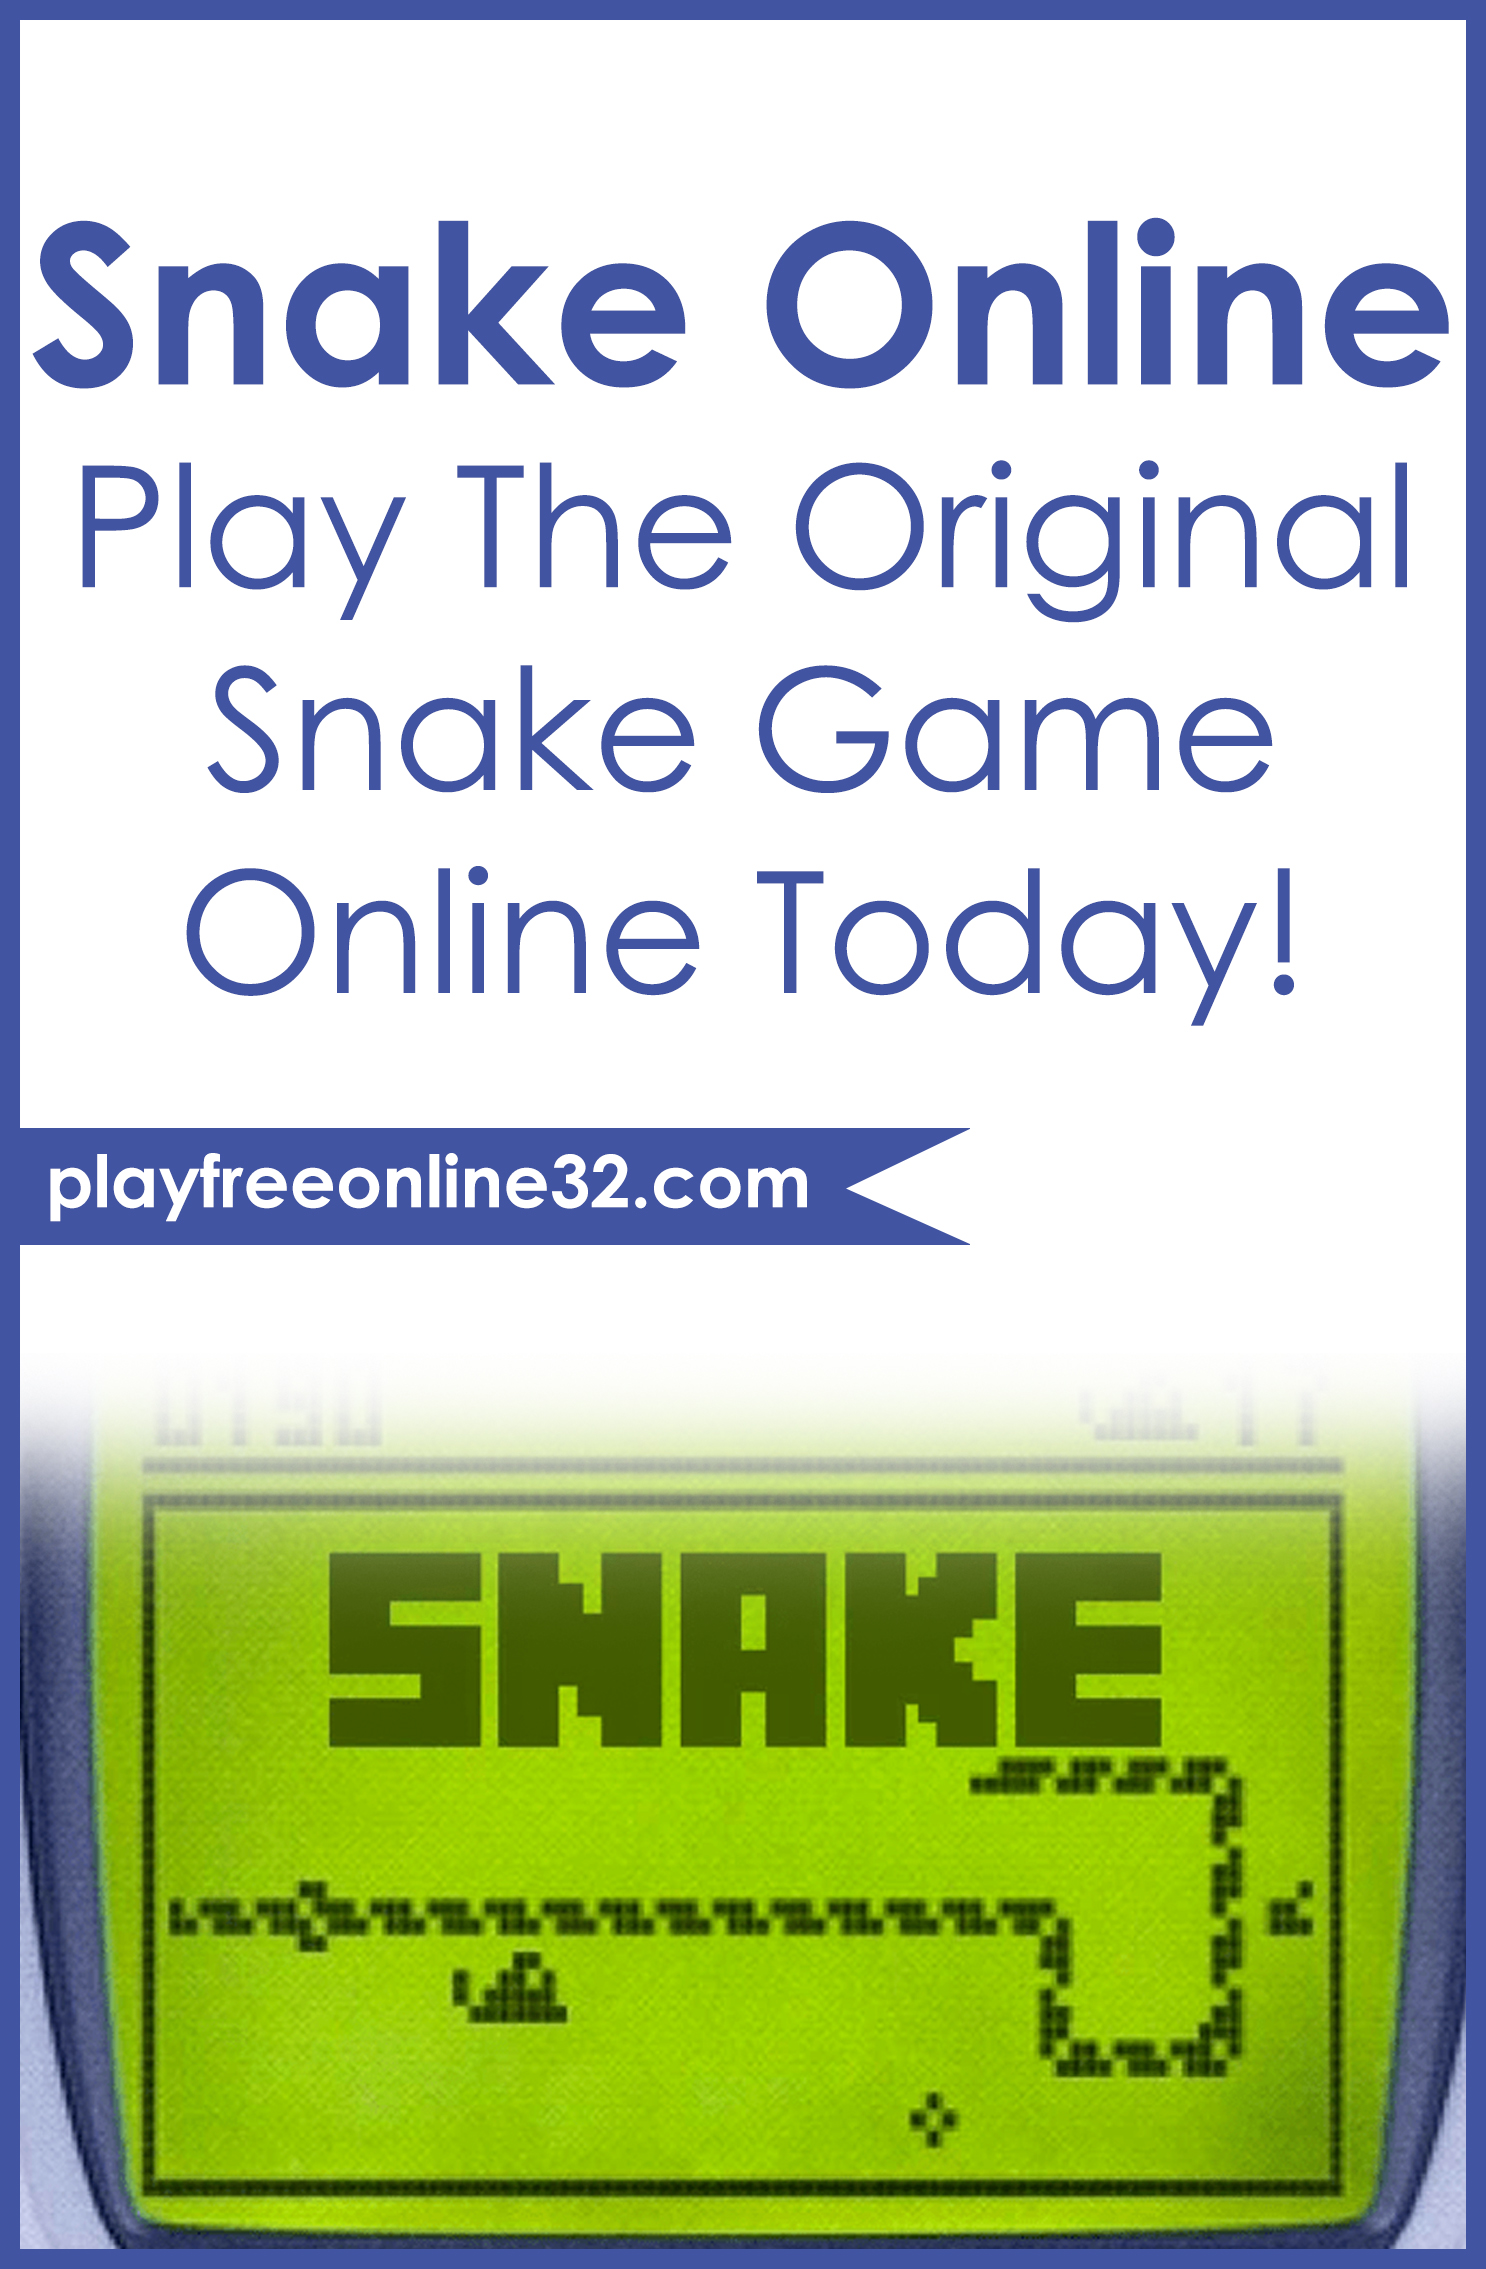 Snake Online • Play The Original Snake Game Online Today!